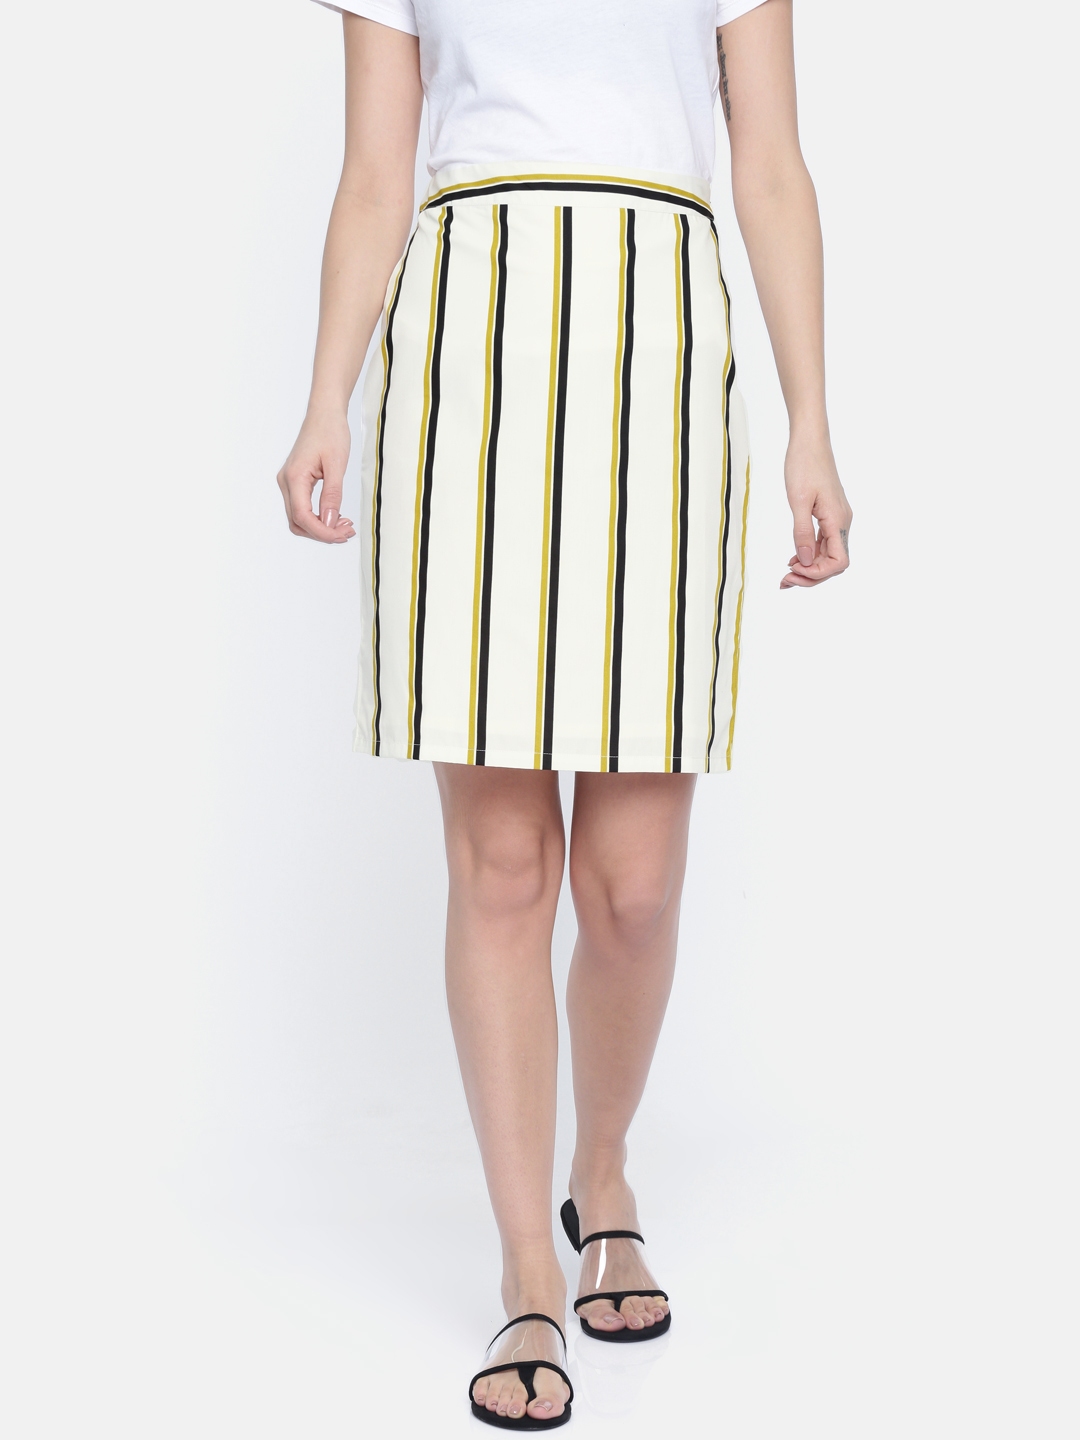 stripped black and white pencil skirts for women